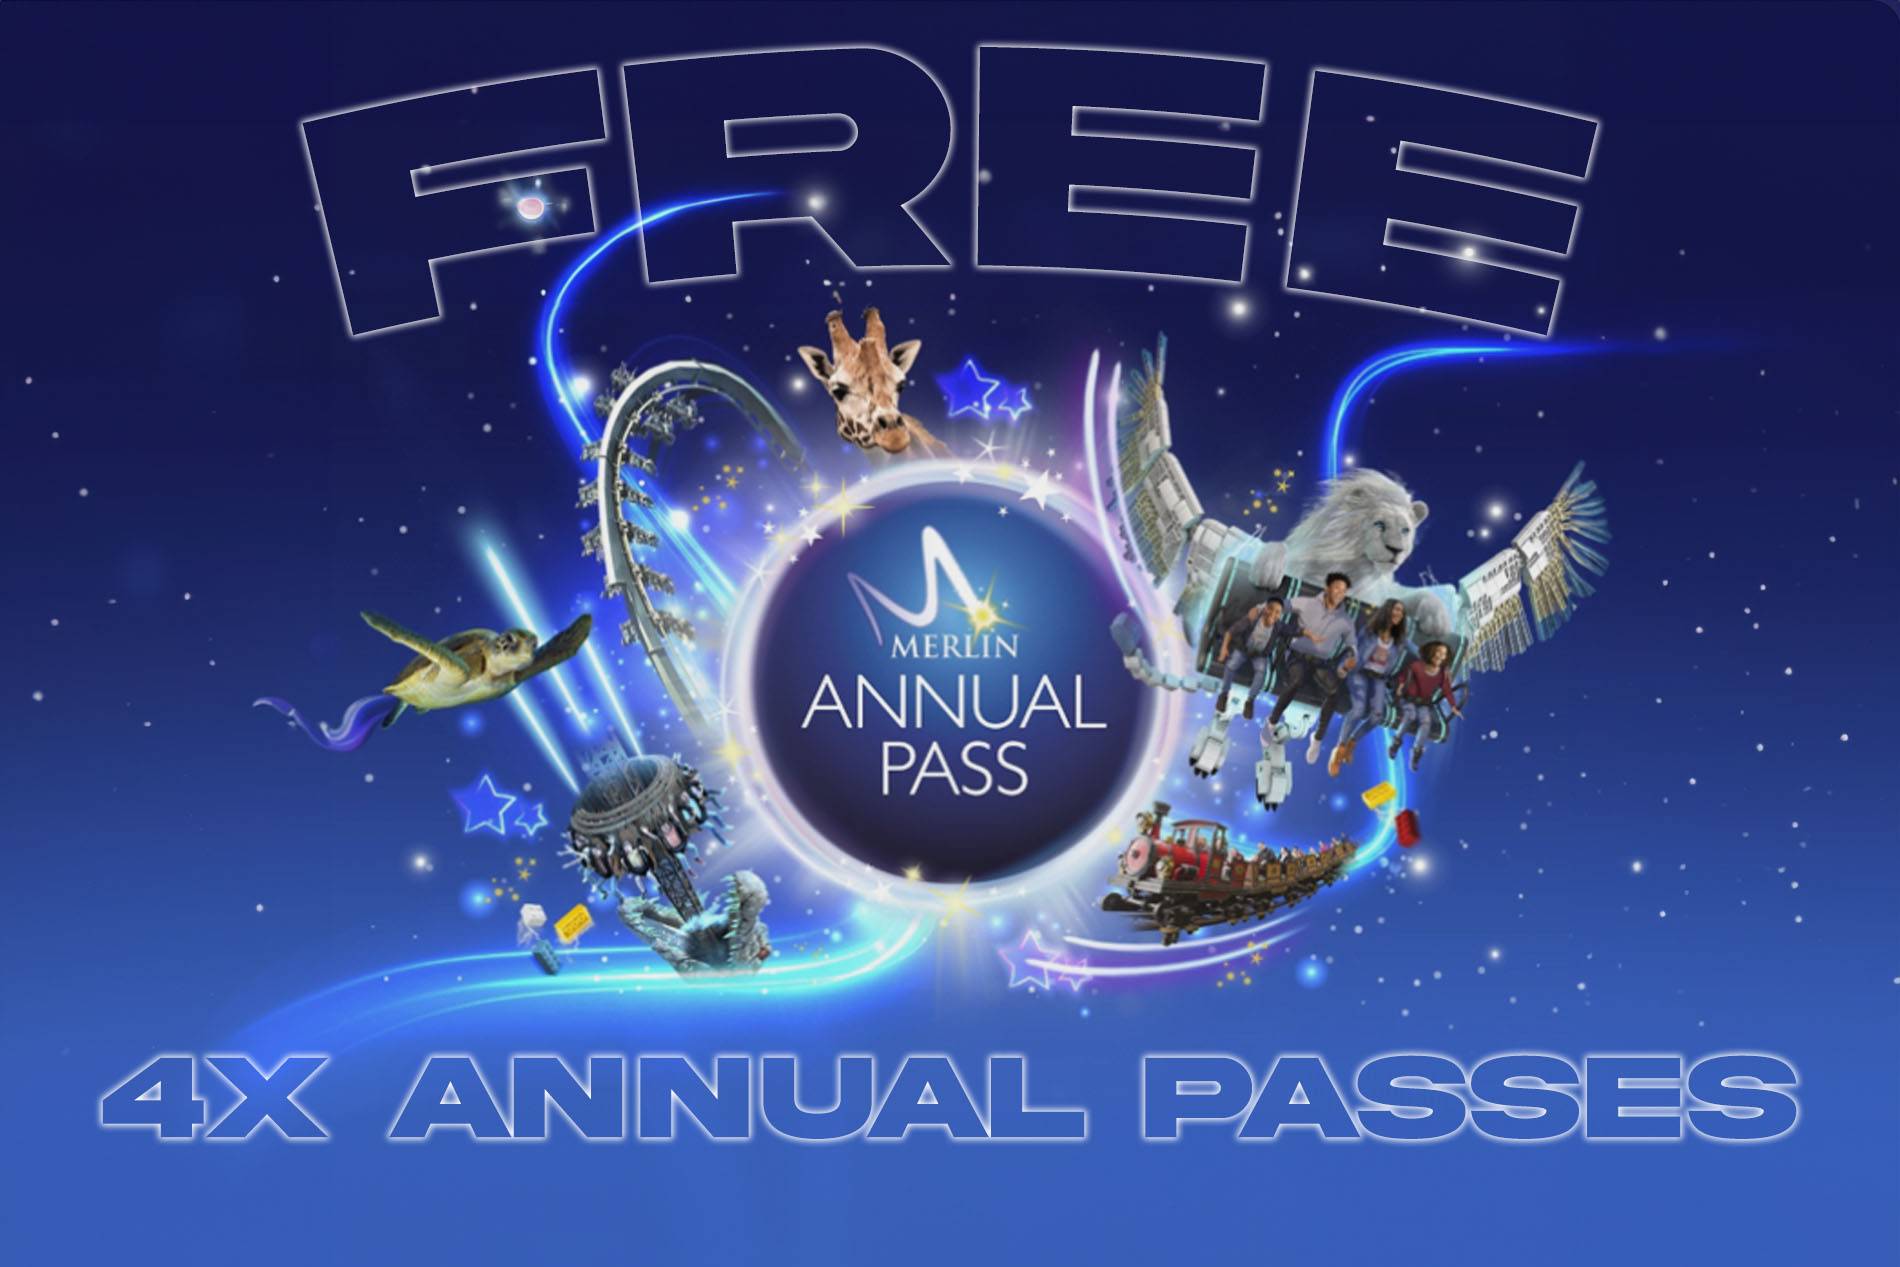 FREE TO ENTER: 4x Annual Merlin Discovery Passes (Spend £1+ and Upgrade to Silver Passes)